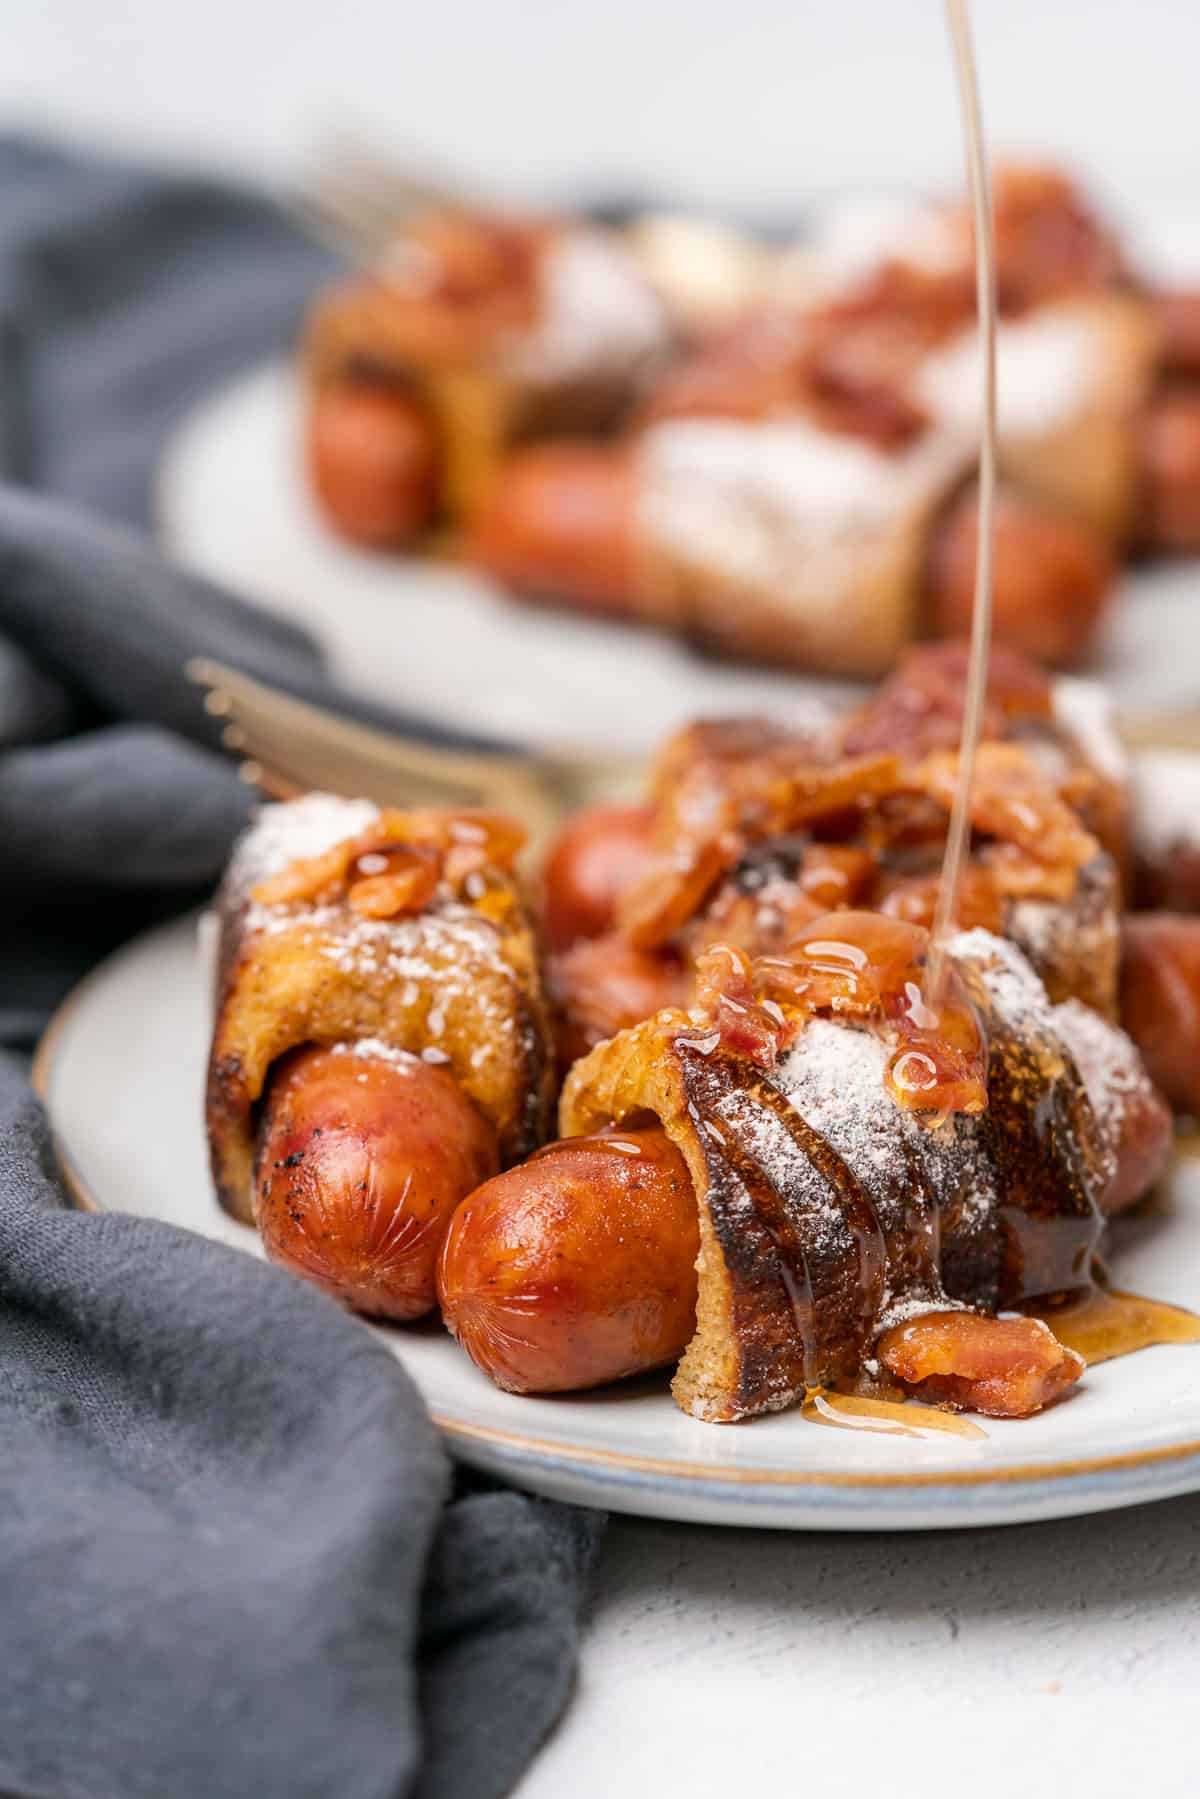 keto french toast pigs in blanket with maple syrup drizzle